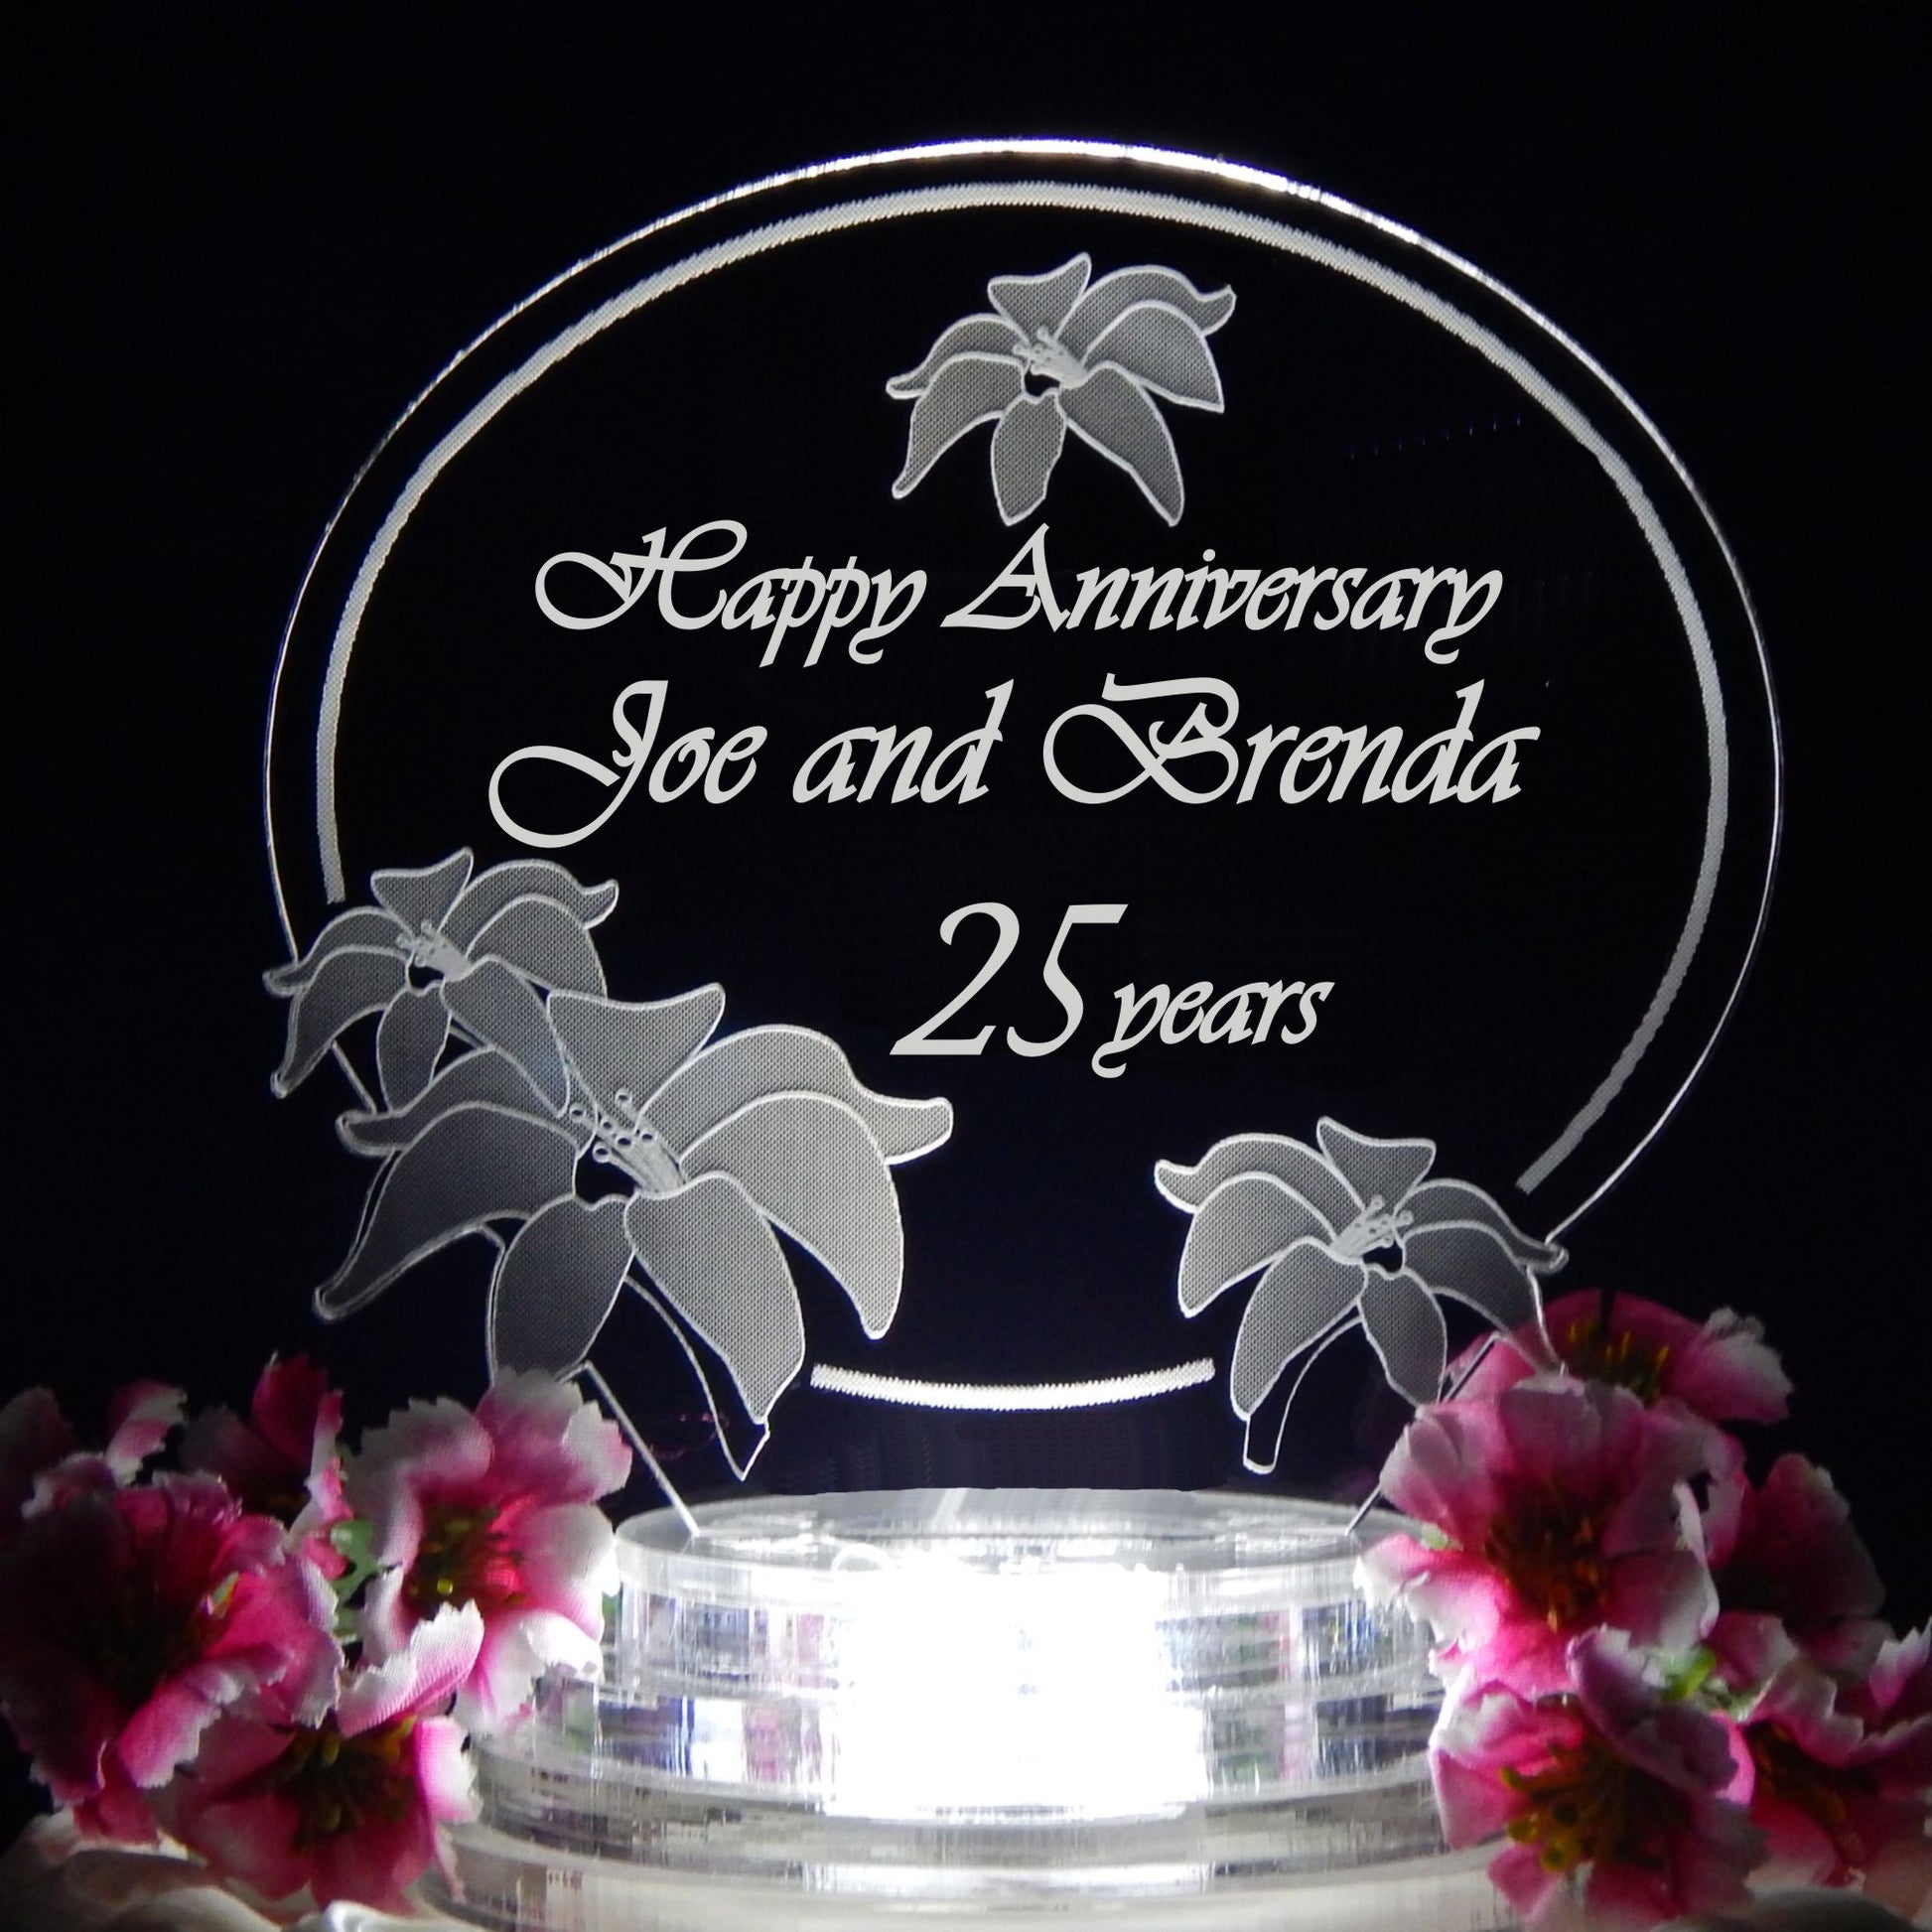 clear acrylic cake topper designed in a lily flower theme engraved with names and Happy Anniversary